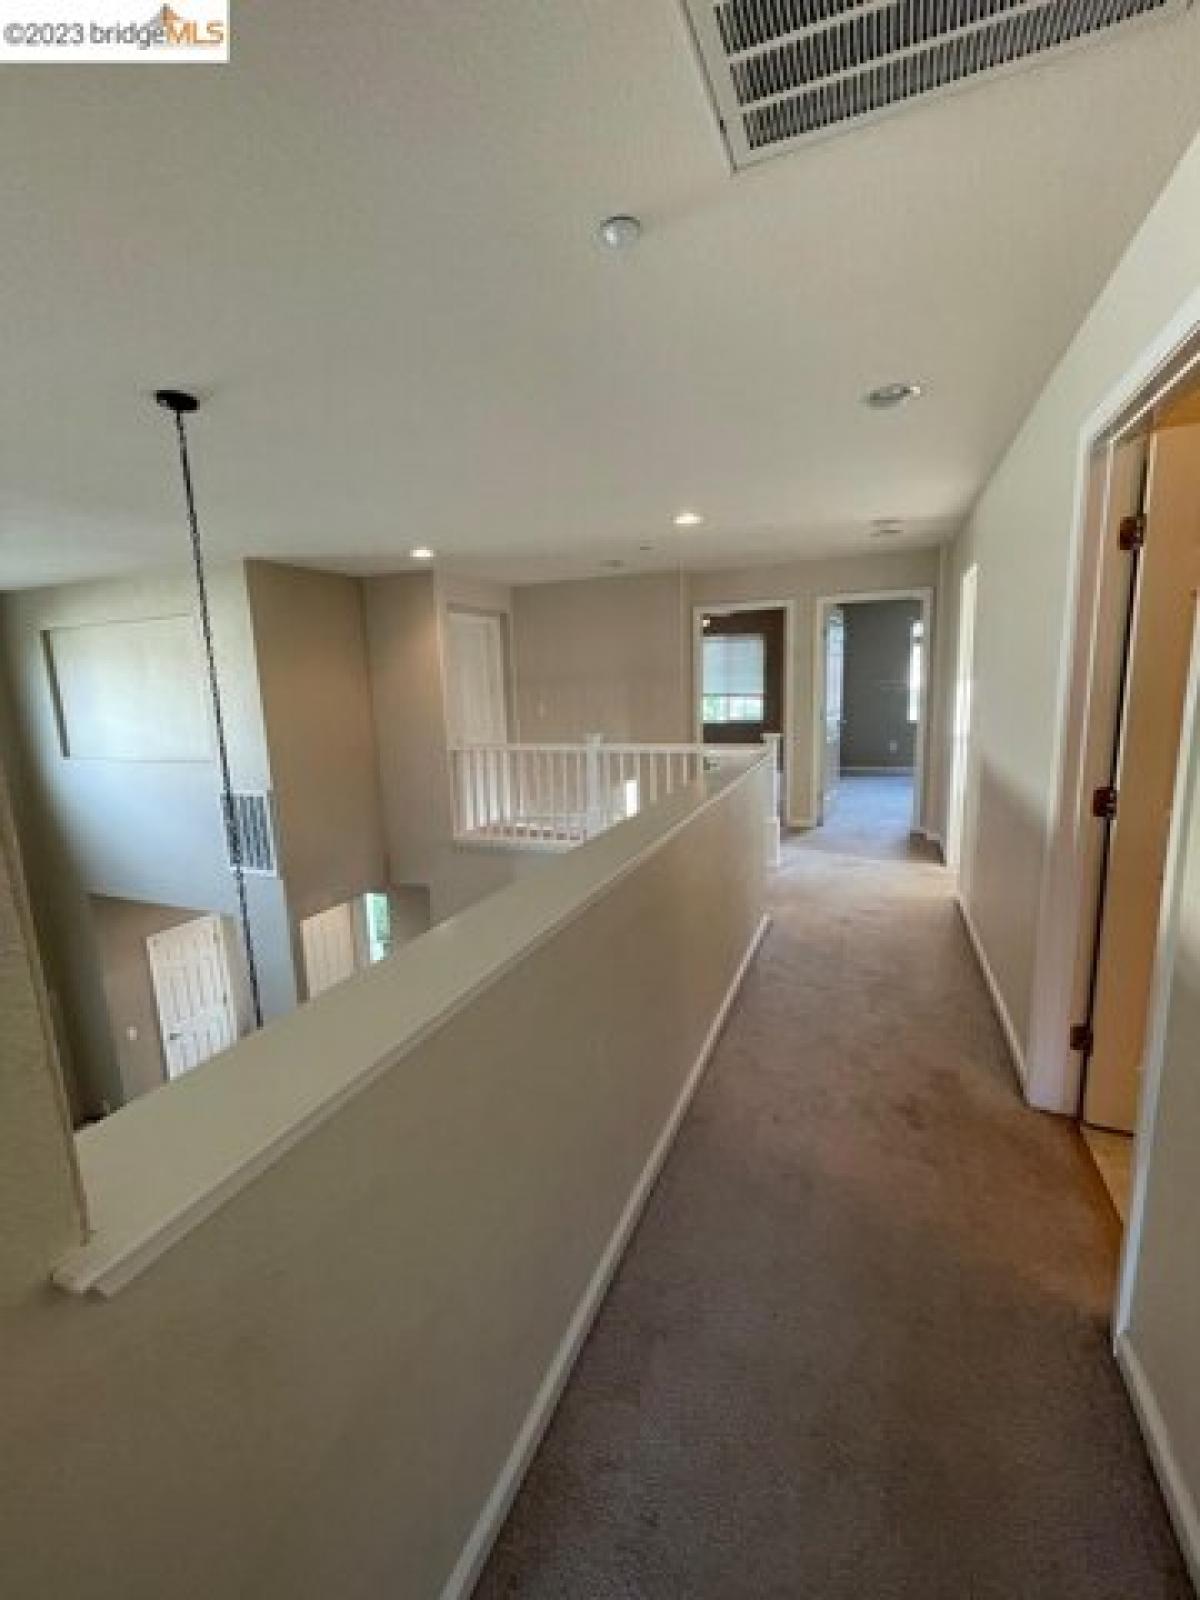 Picture of Home For Rent in Brentwood, California, United States